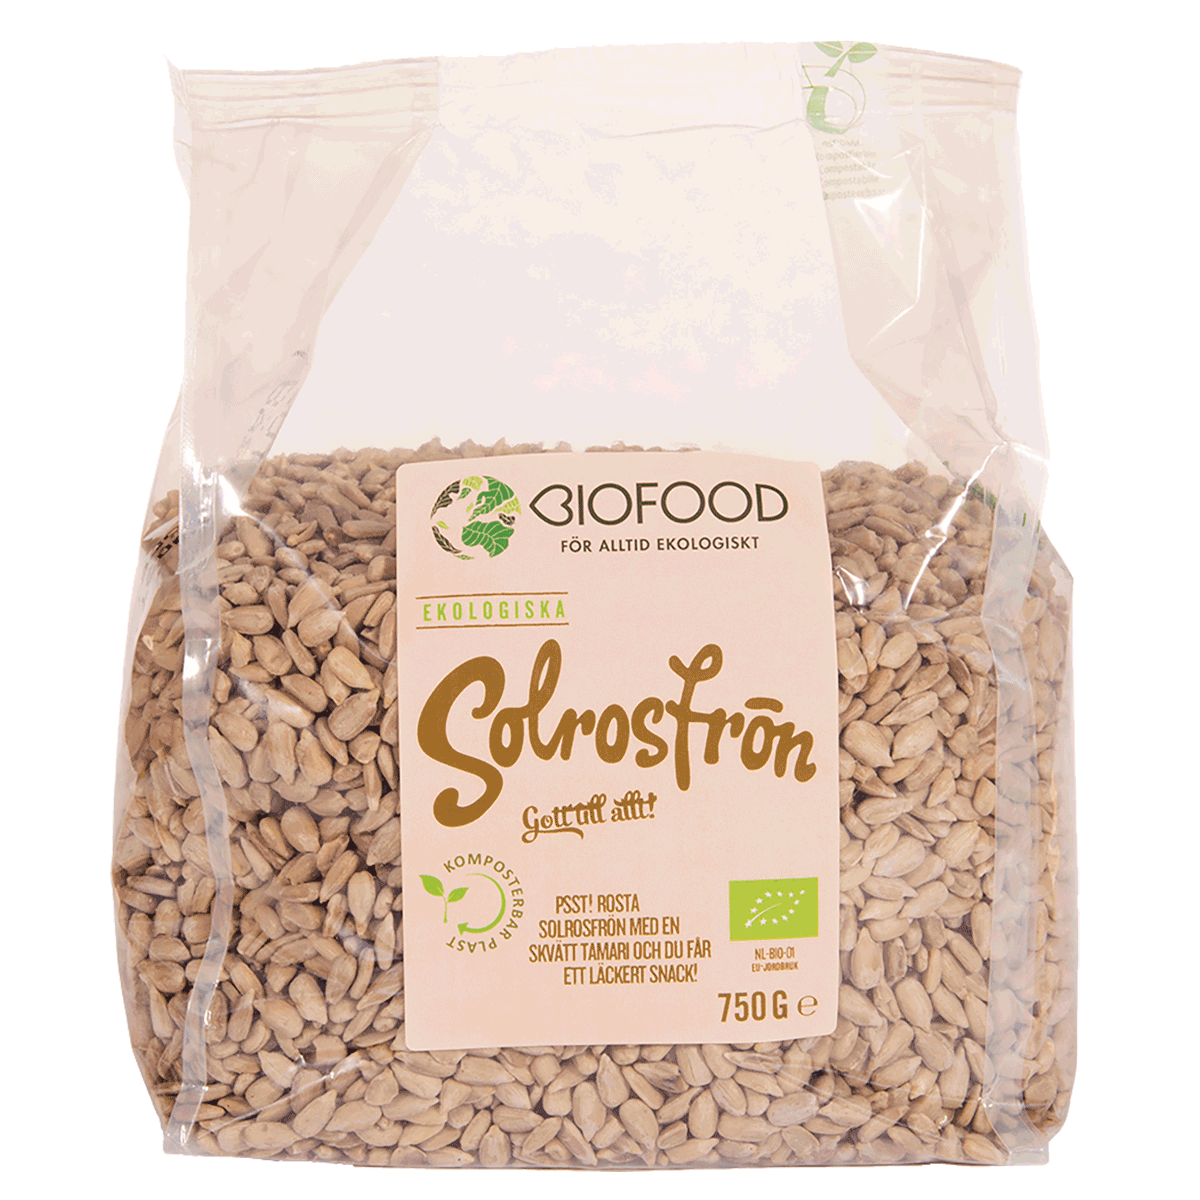 Sunflower seeds from Biofood